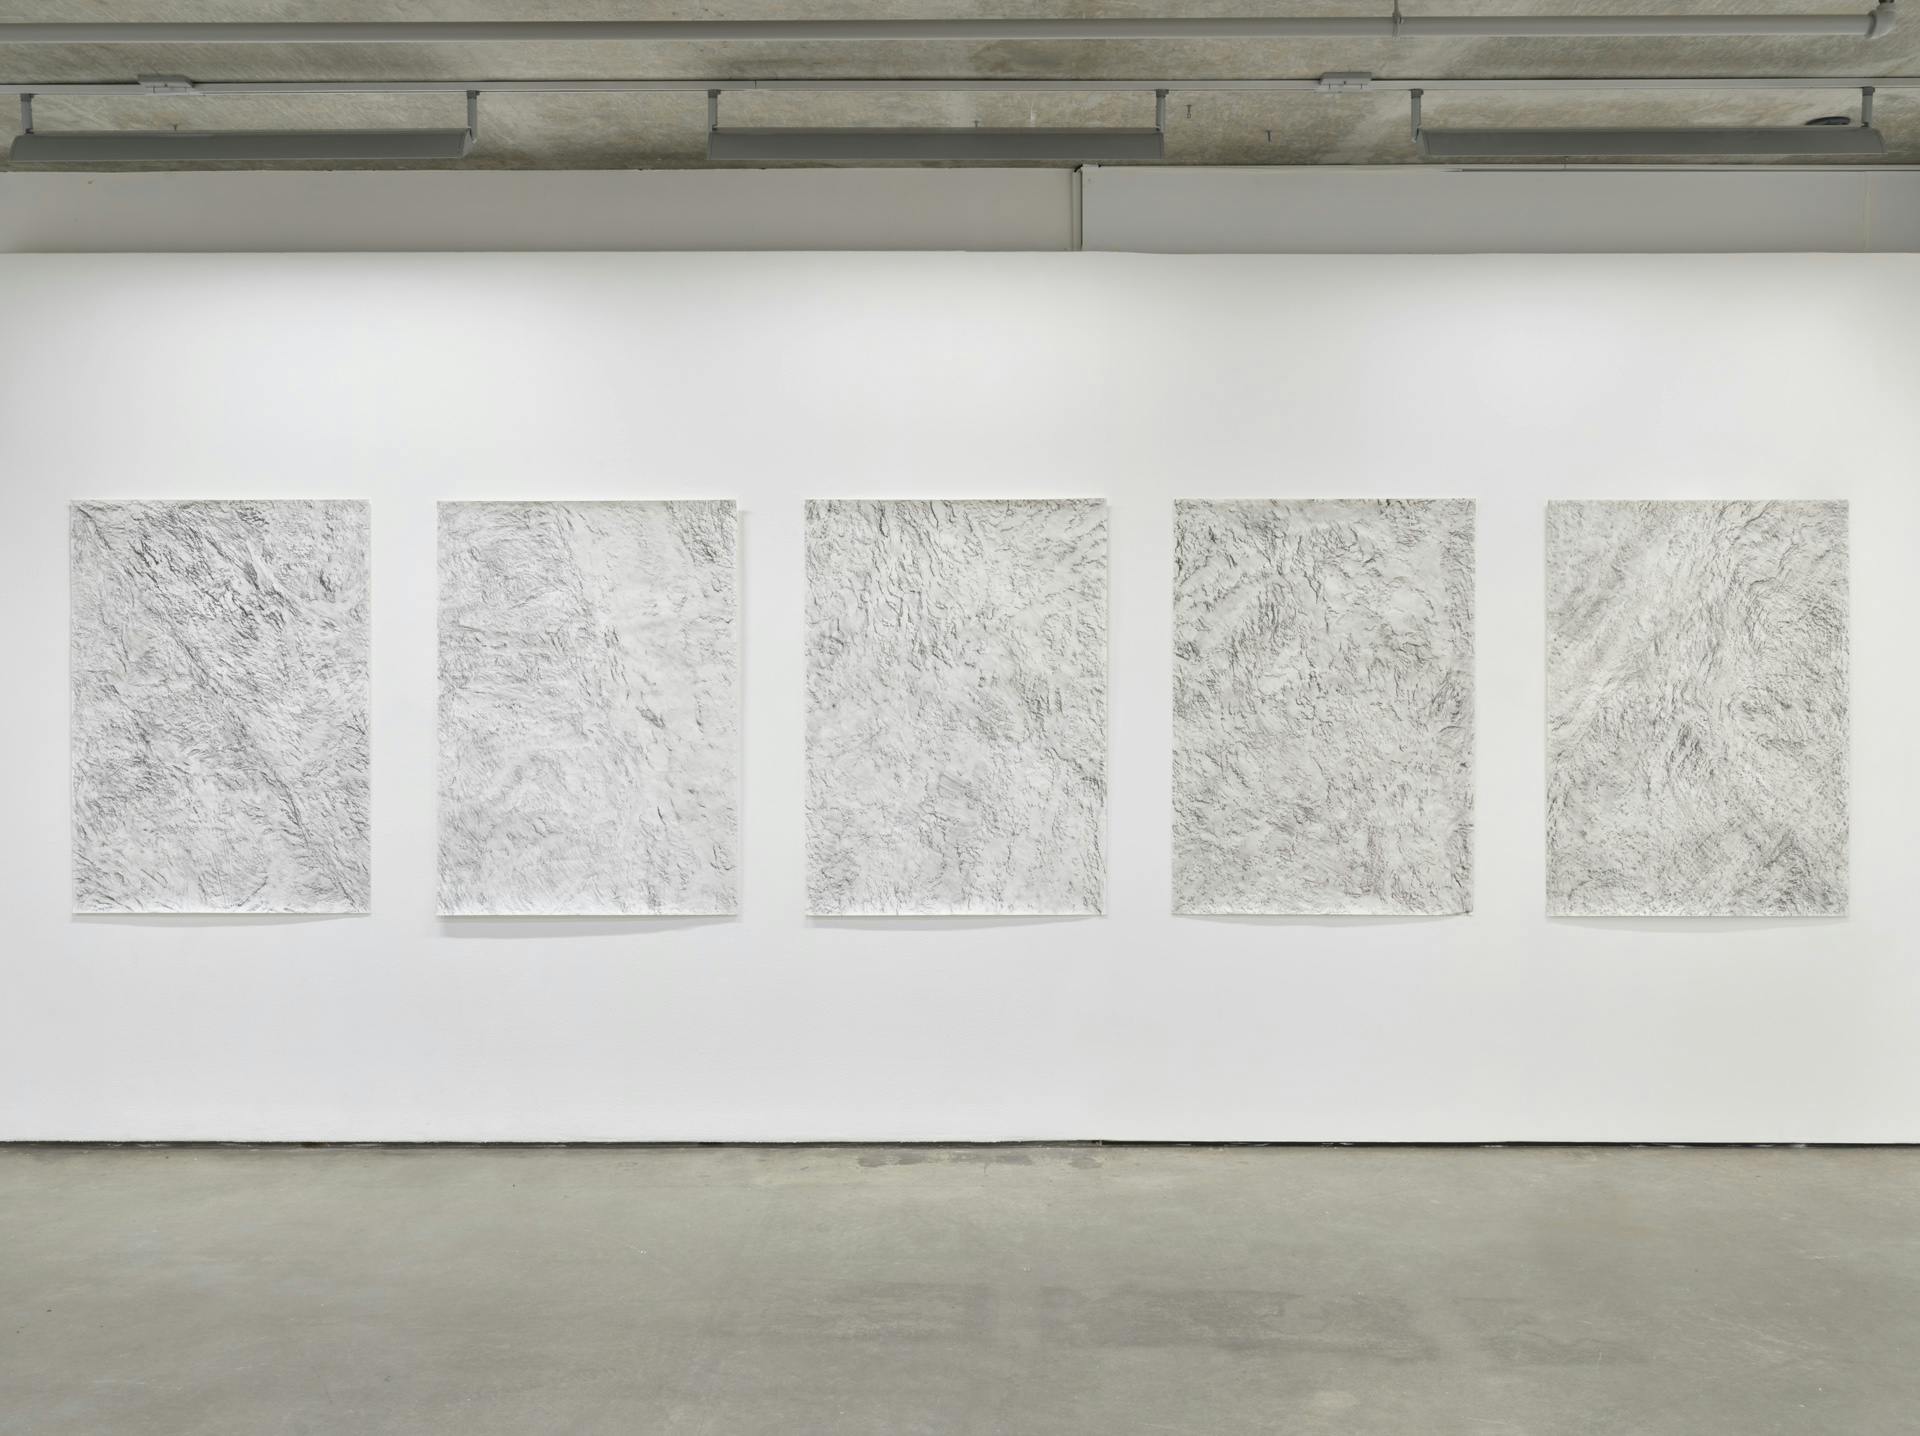 A frontal photo of five graphite rubbings on rectangular sheets of paper arranged in a row on a white wall.